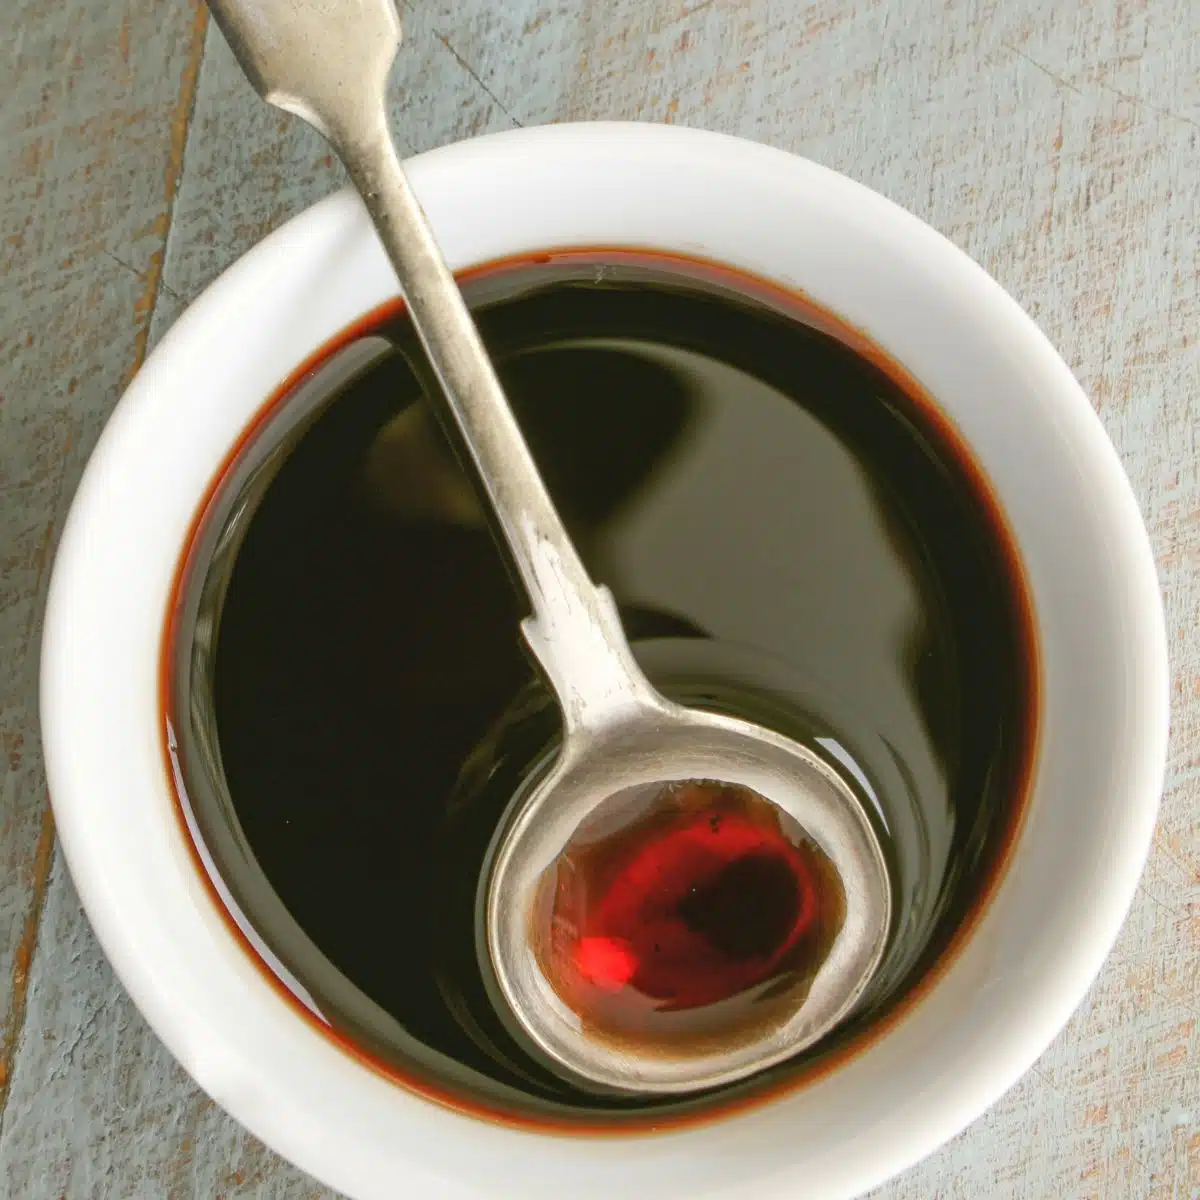 Square image showing balsamic reduction in a small white bowl.